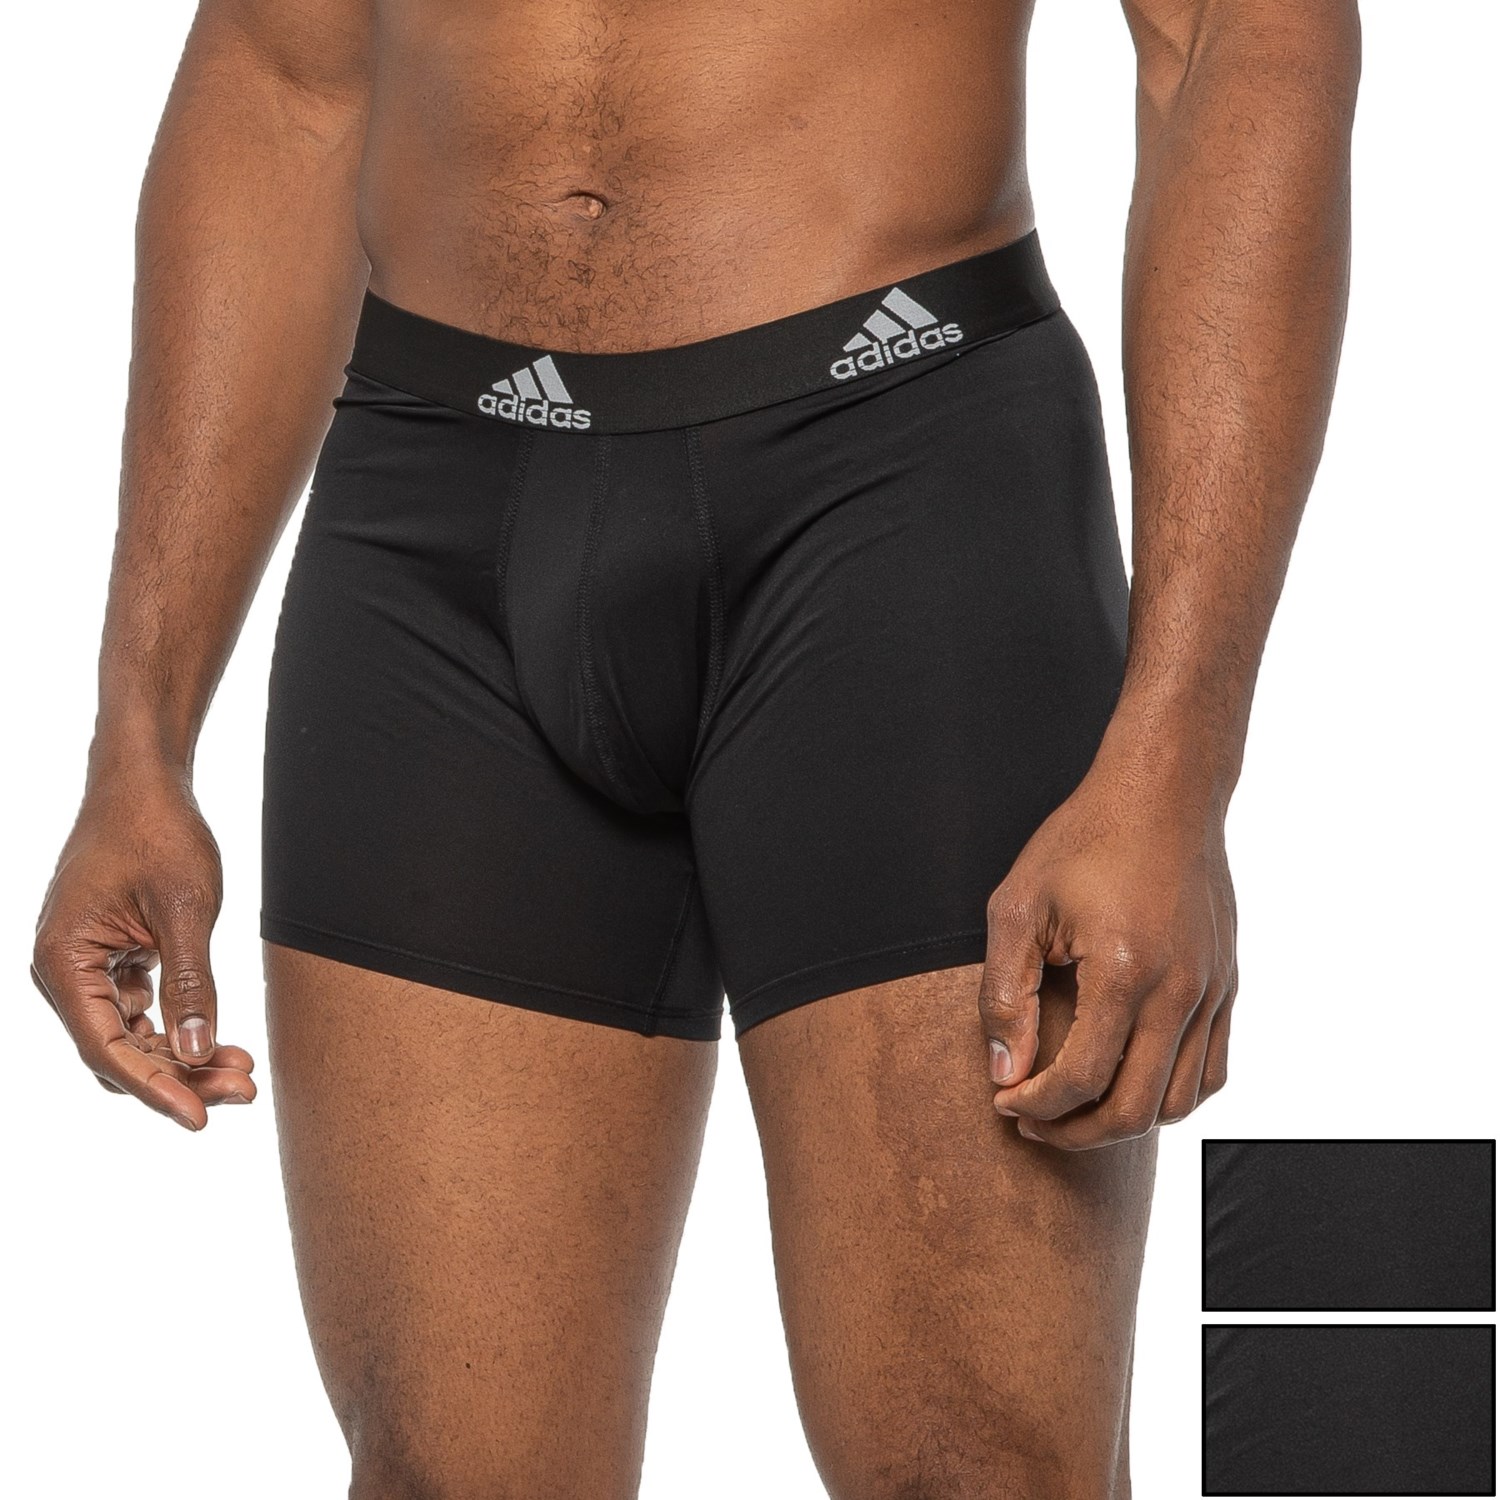 adidas climacool boxer briefs size chart